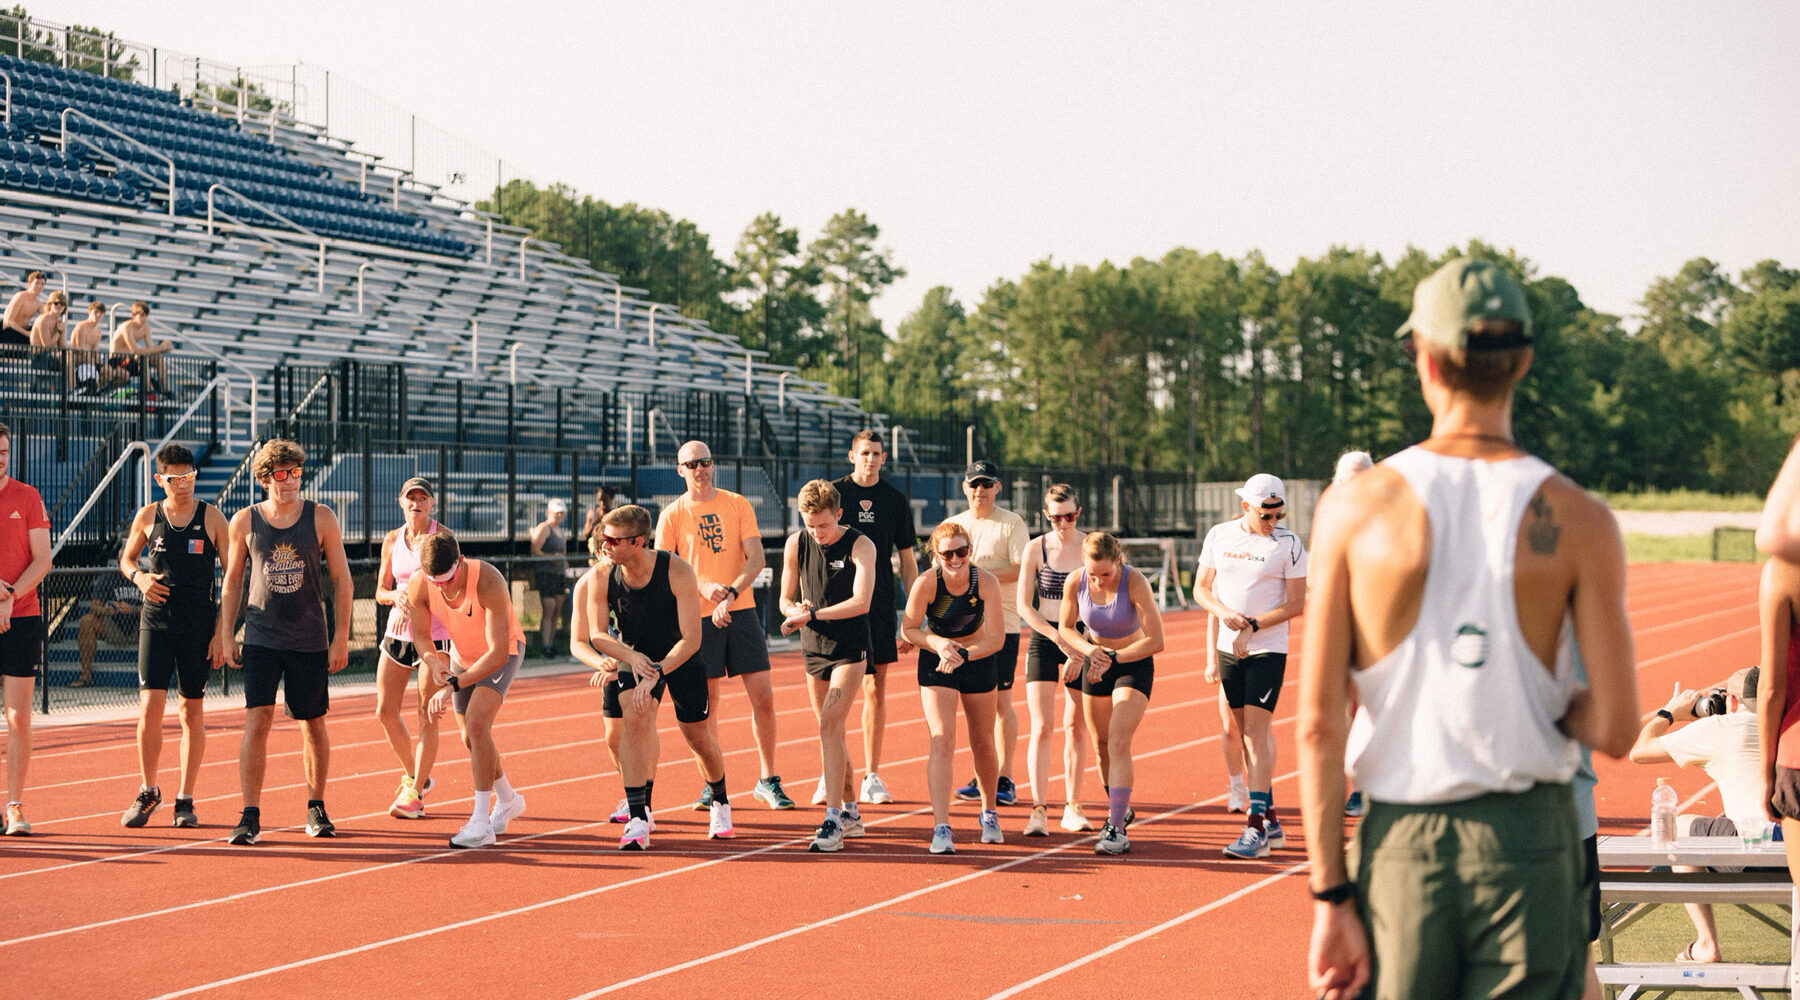 Tuesday track night at St. Augustine's University